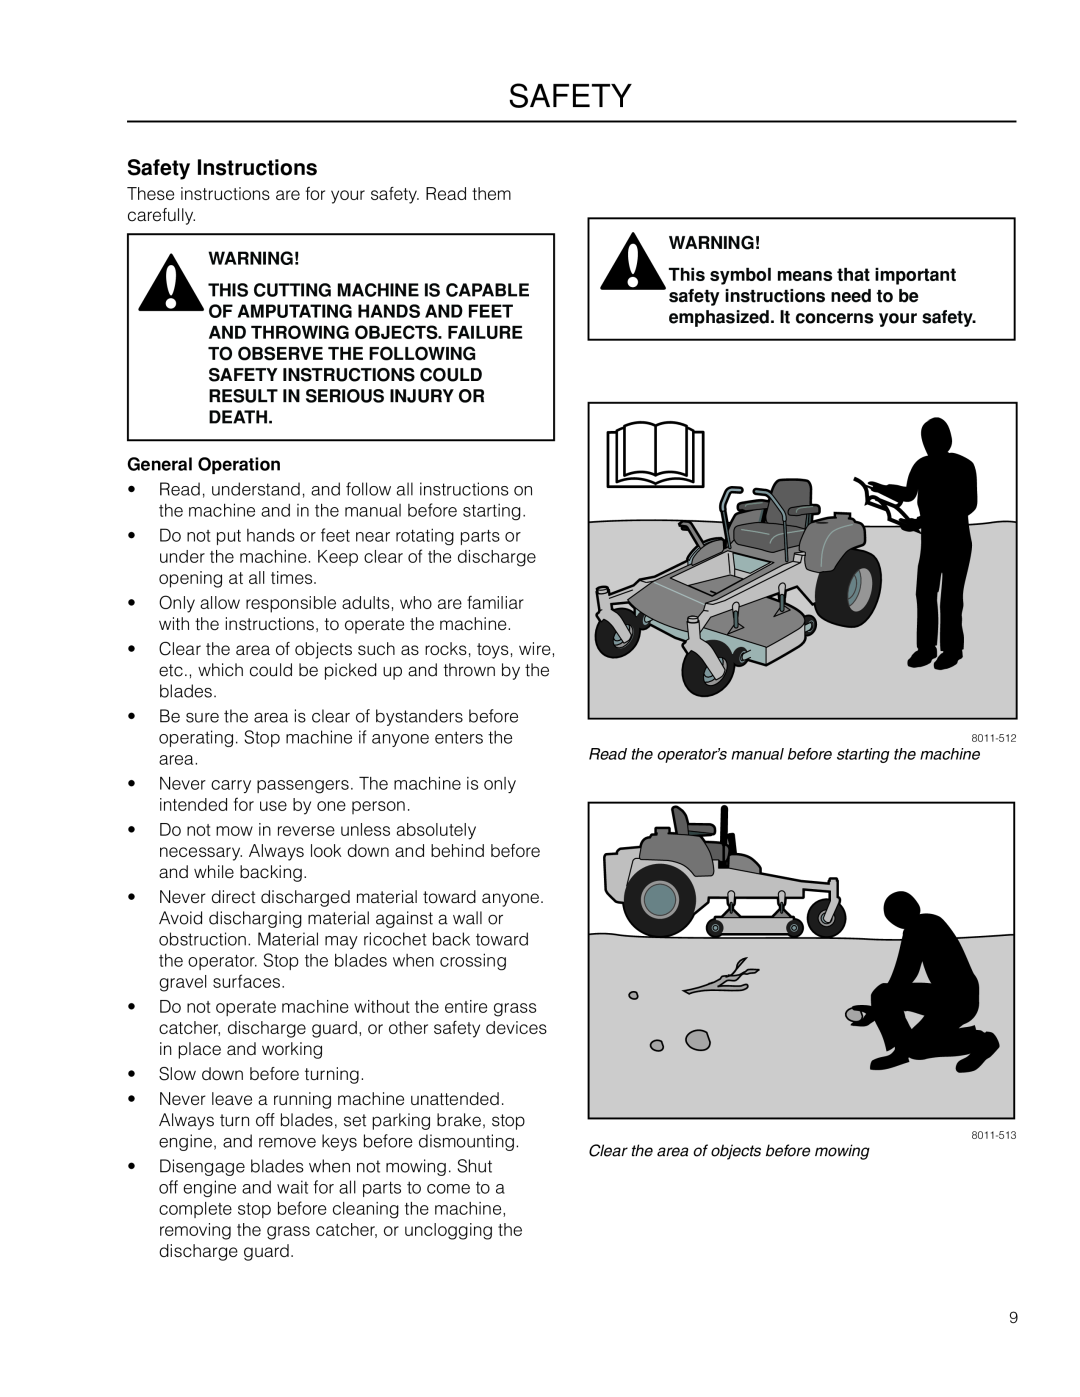 Dixon 966985401 Safety Instructions, This Cutting Machine Is Capable Of Amputating Hands And Feet, General Operation 